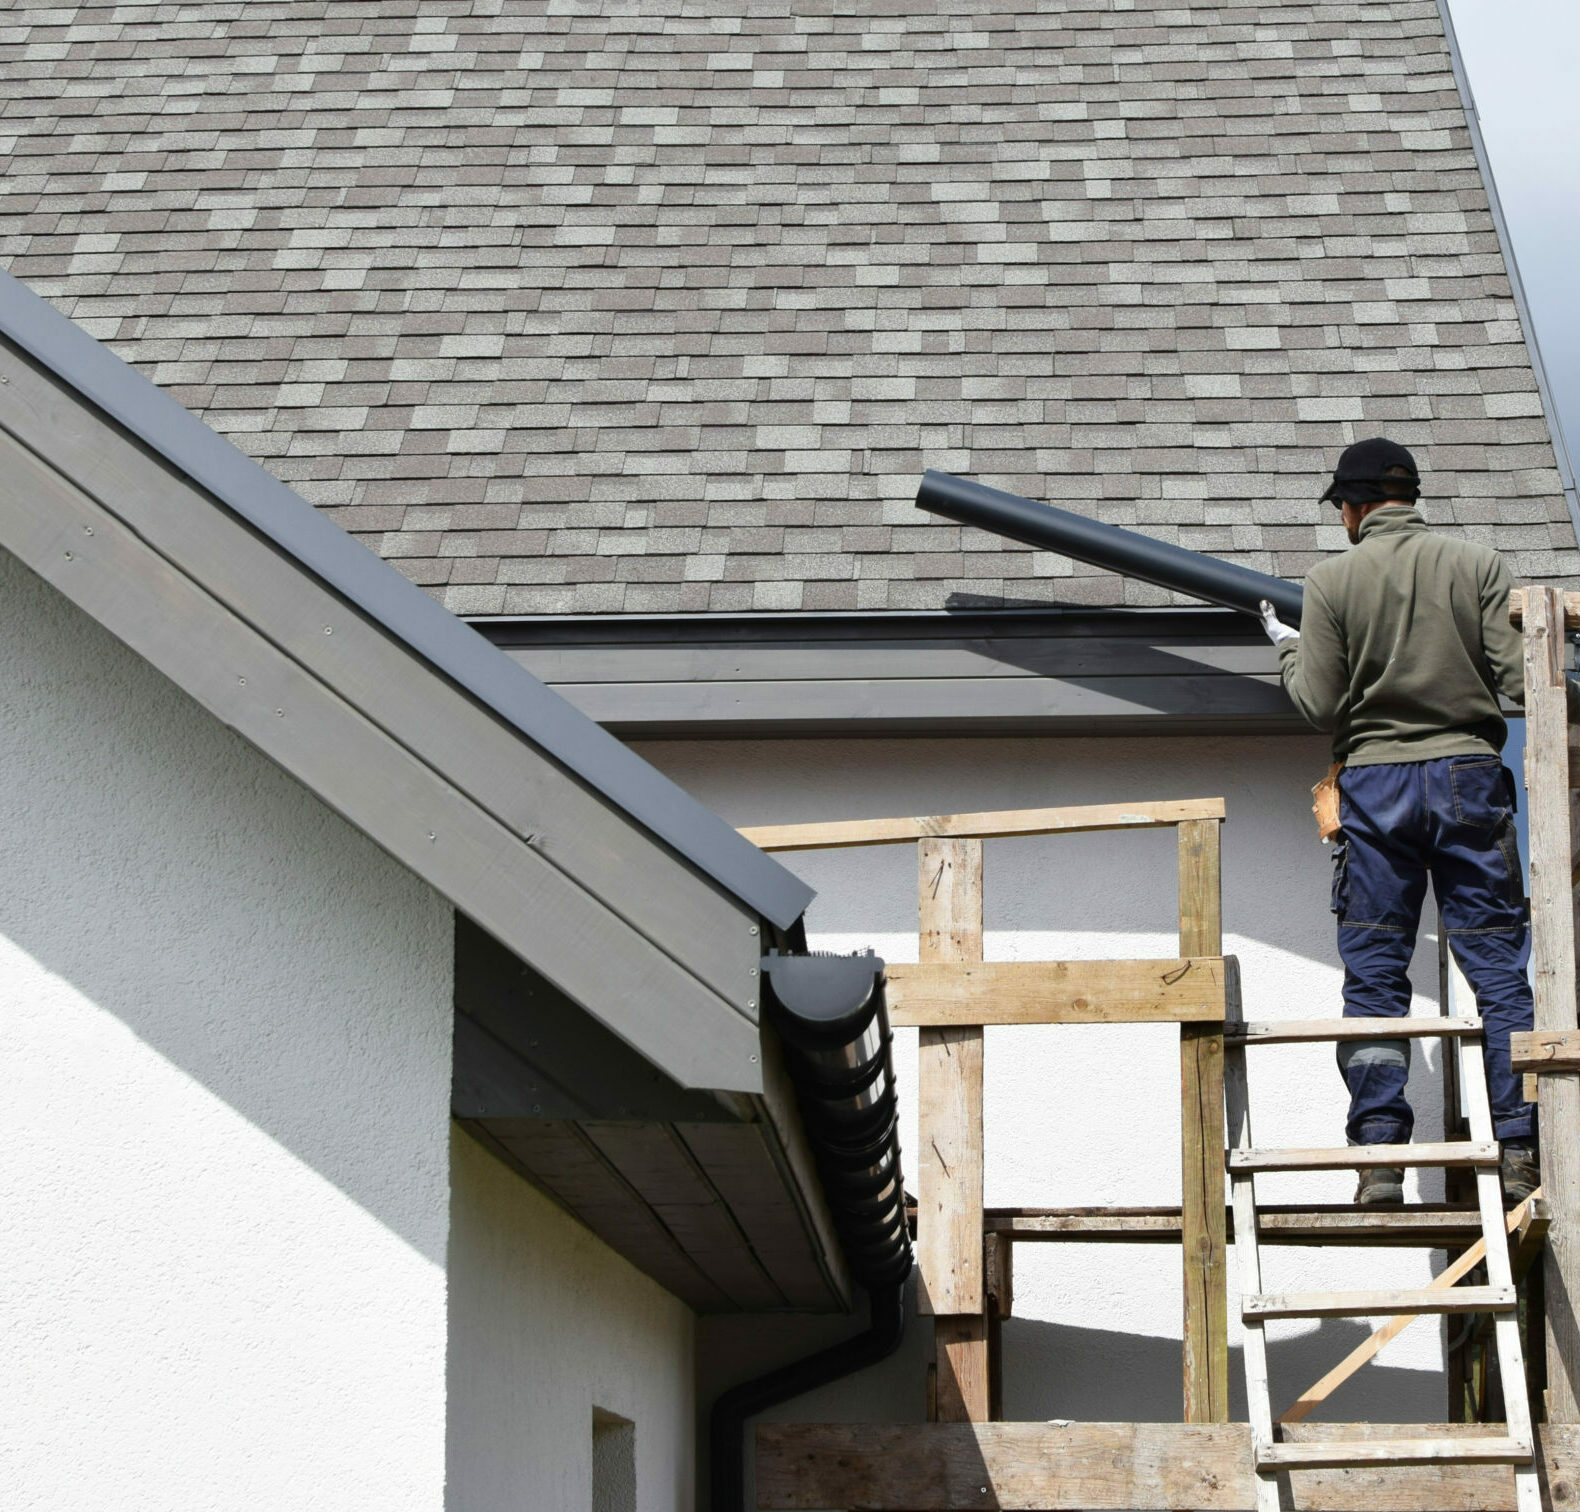 Uncover essential tips on Residential Gutter Repair and prevent costly home damage. Dive into our informative guide now!